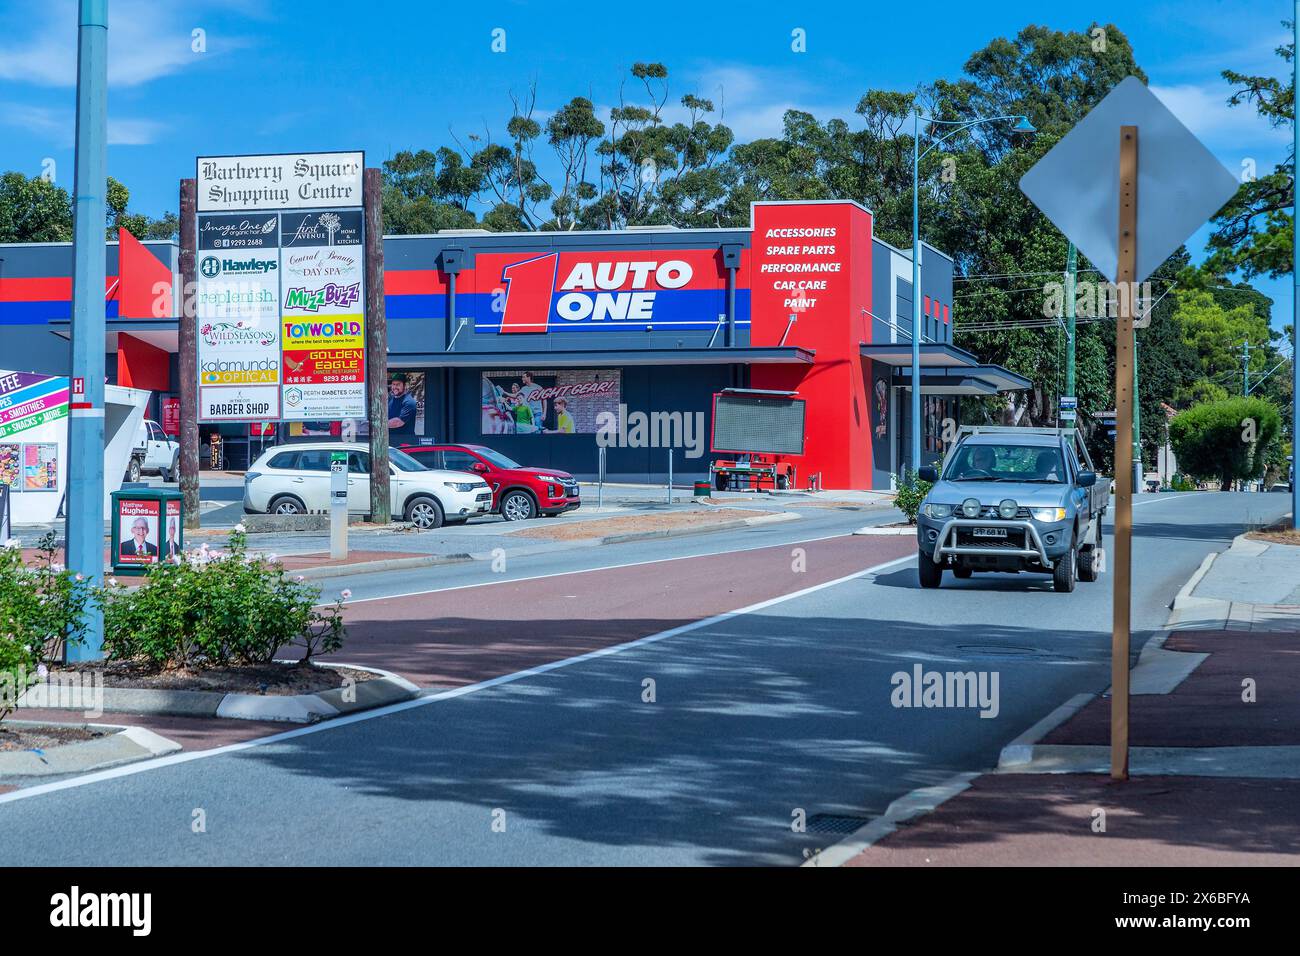 Auto One garage on the Canning road coming into Kalamunda a town and eastern suburb of Perth, Western Australia,. Stock Photo